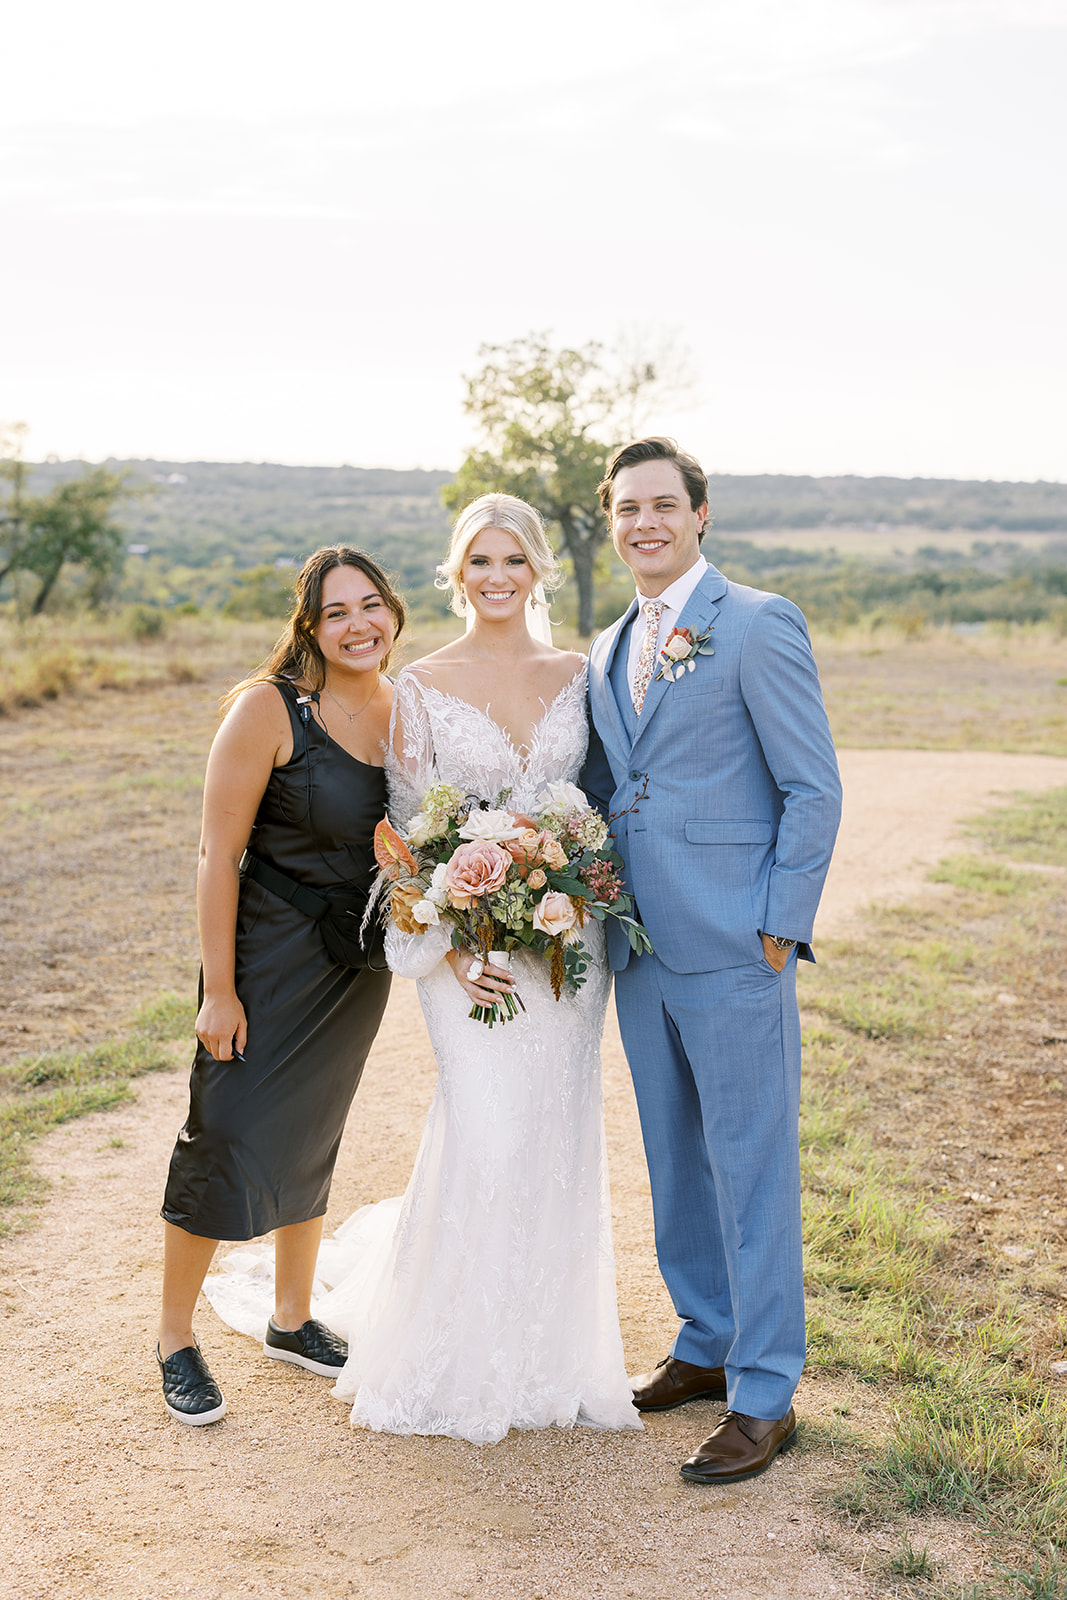 Wedding planner smiling with bride and groom